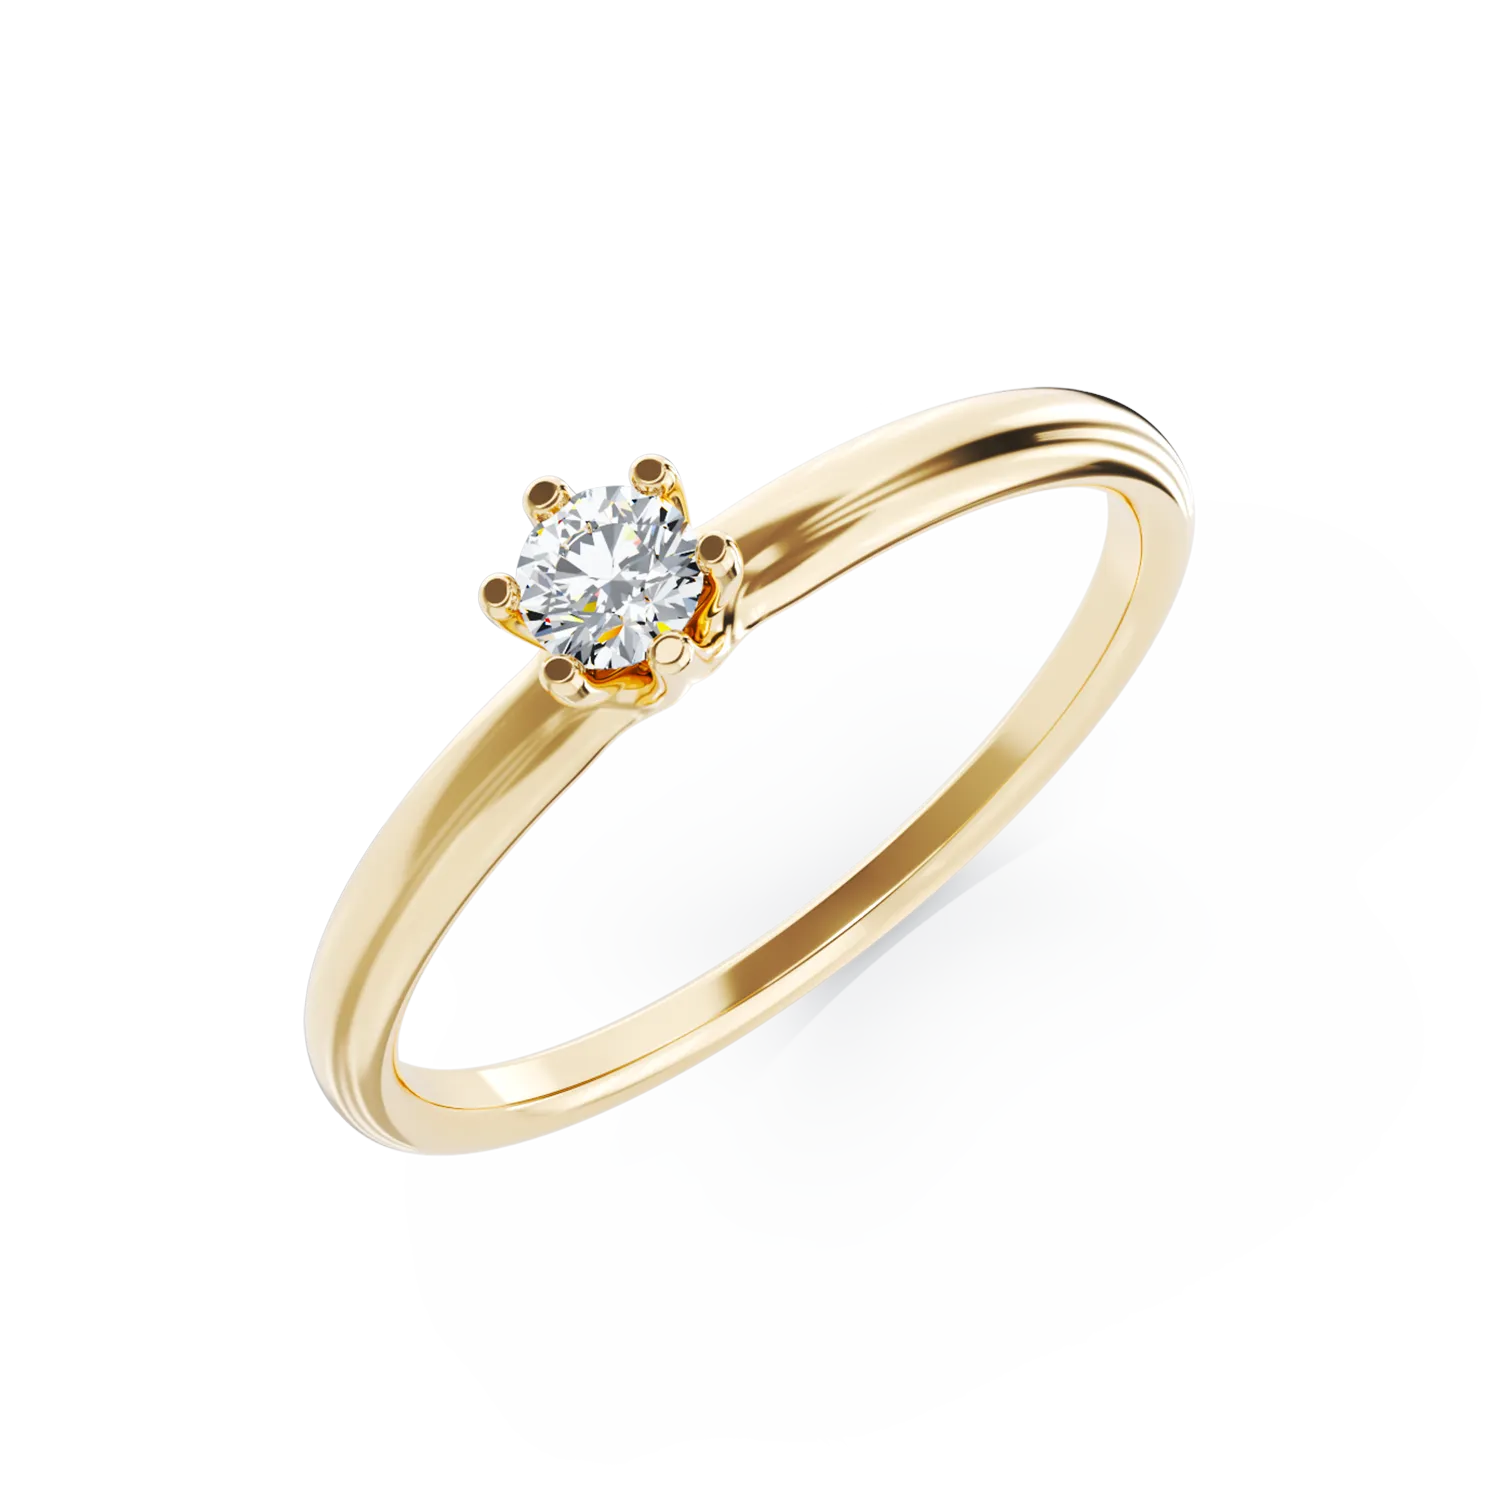 18K yellow gold engagement ring with a 0.105ct solitaire diamond